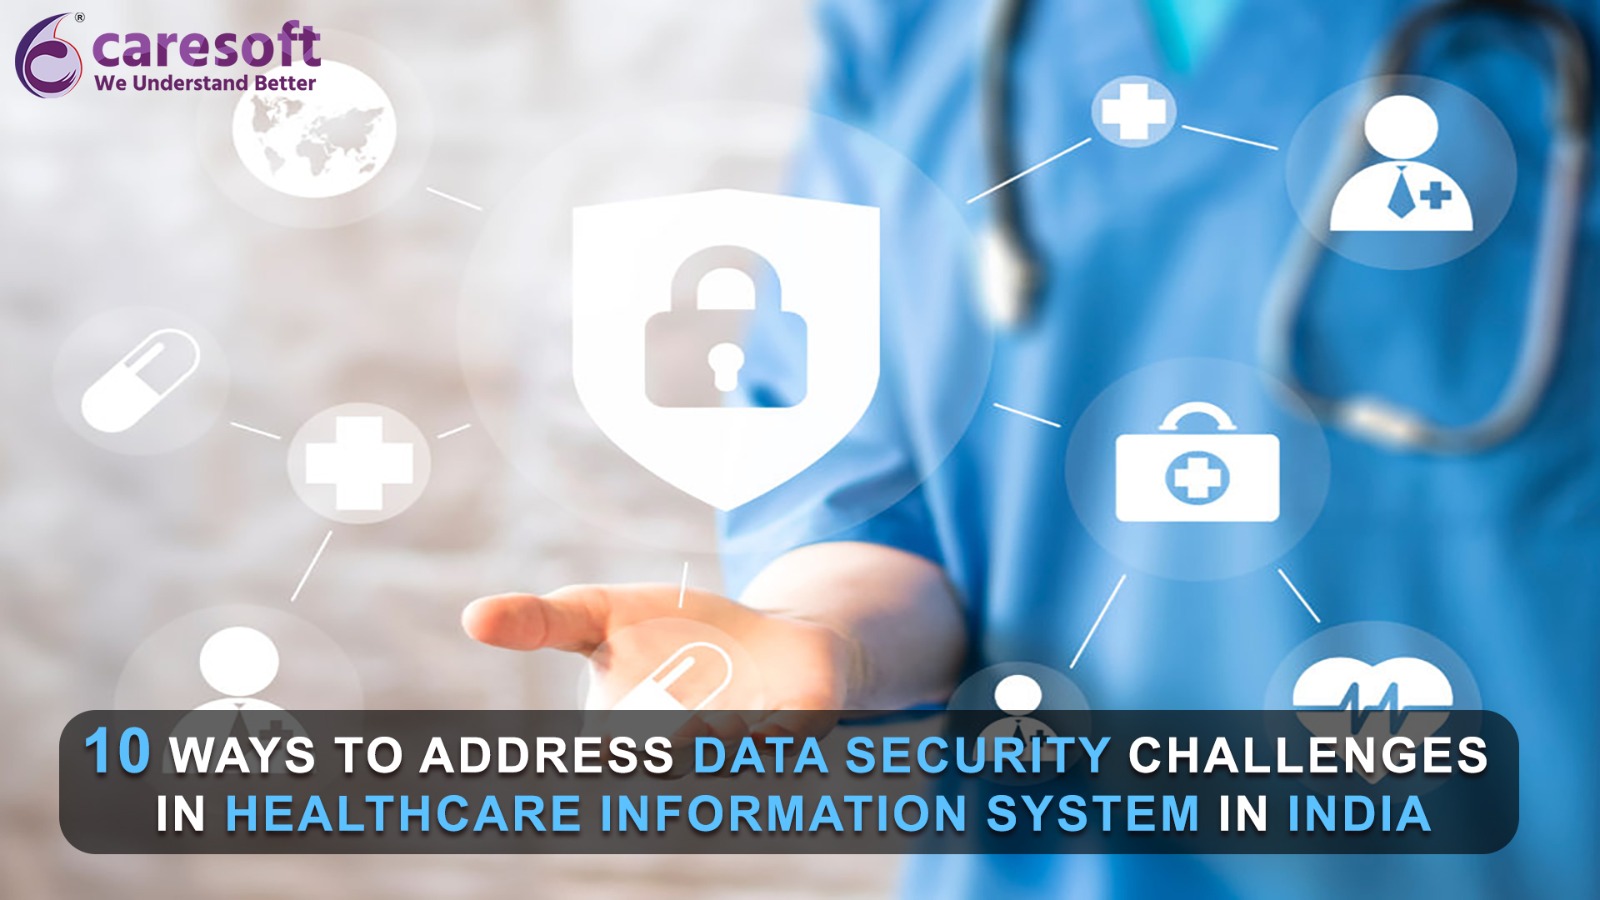 10 Ways to Address Data Security Challenges in Healthcare Information Systems in India